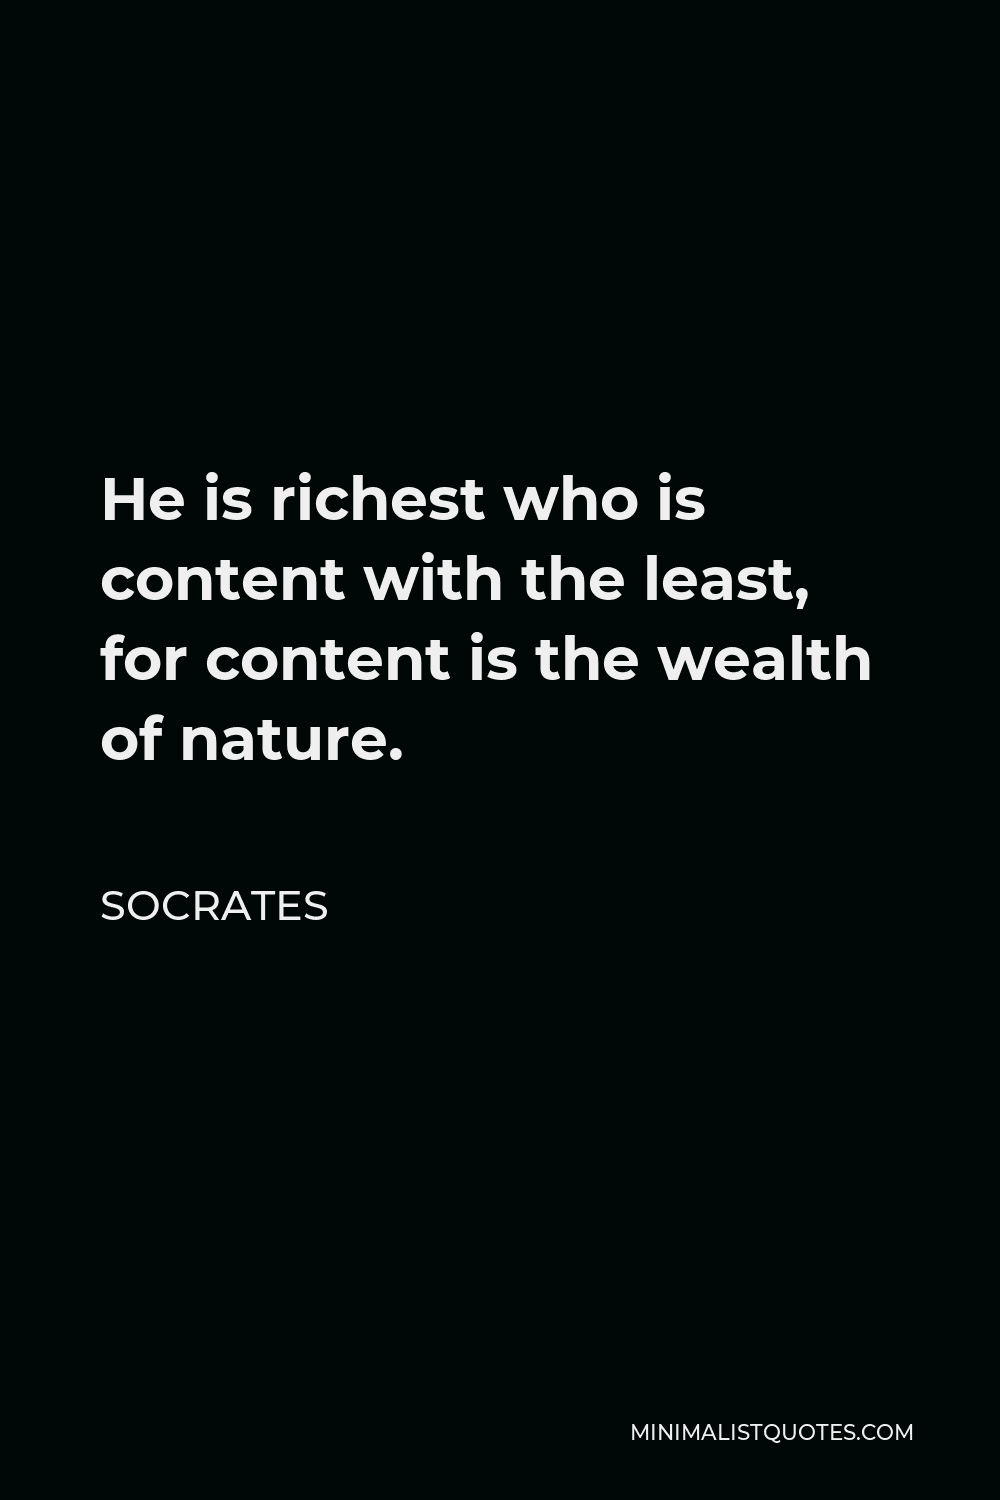 Socrates Quote - He is richest who is content with the least, for content is the wealth of nature.